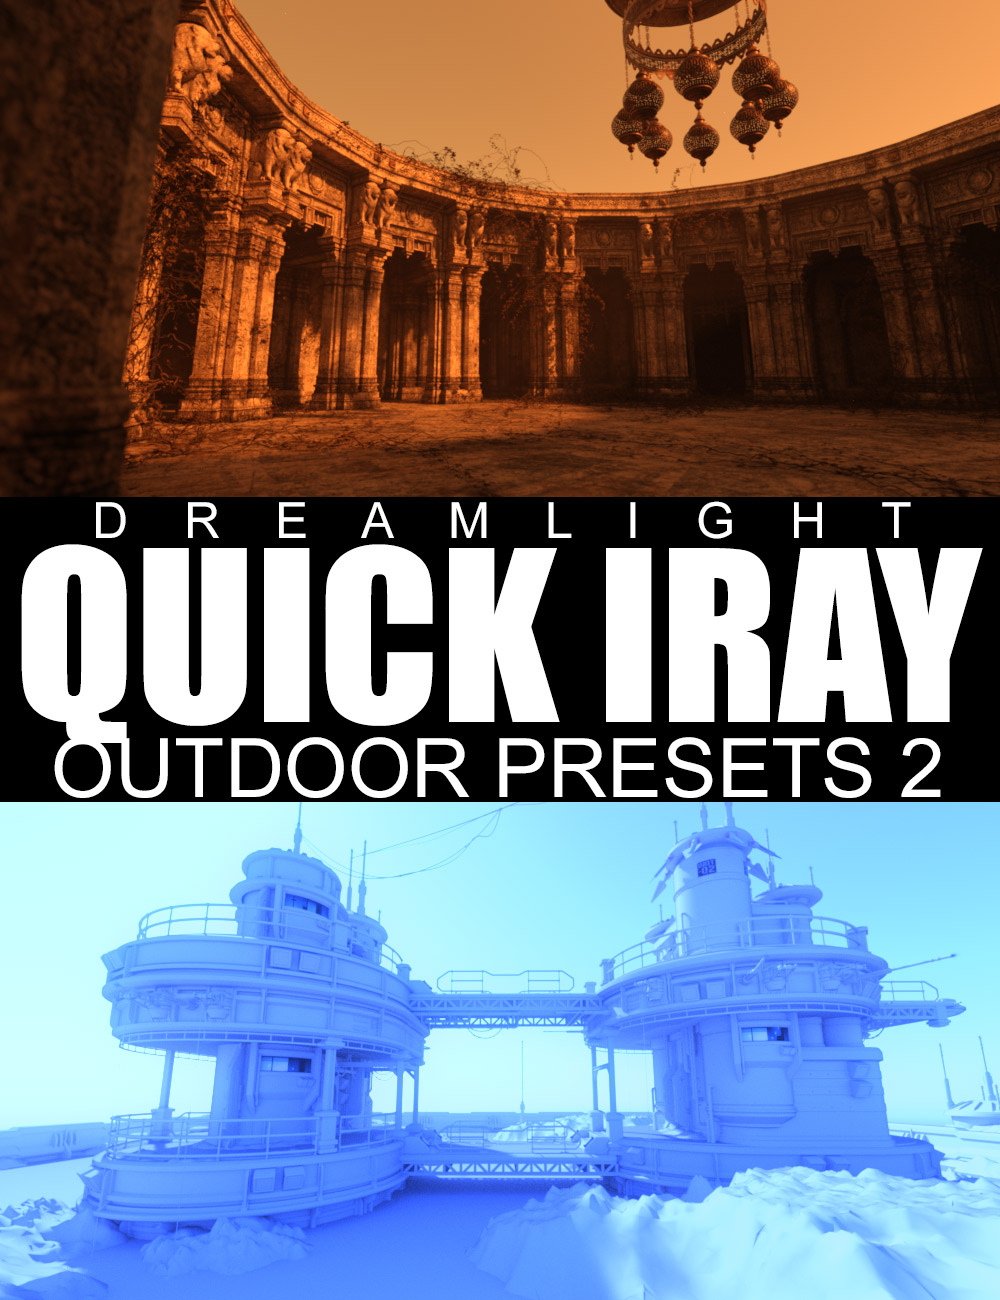 Quick Iray Outdoor Presets 2 by: Dreamlight, 3D Models by Daz 3D